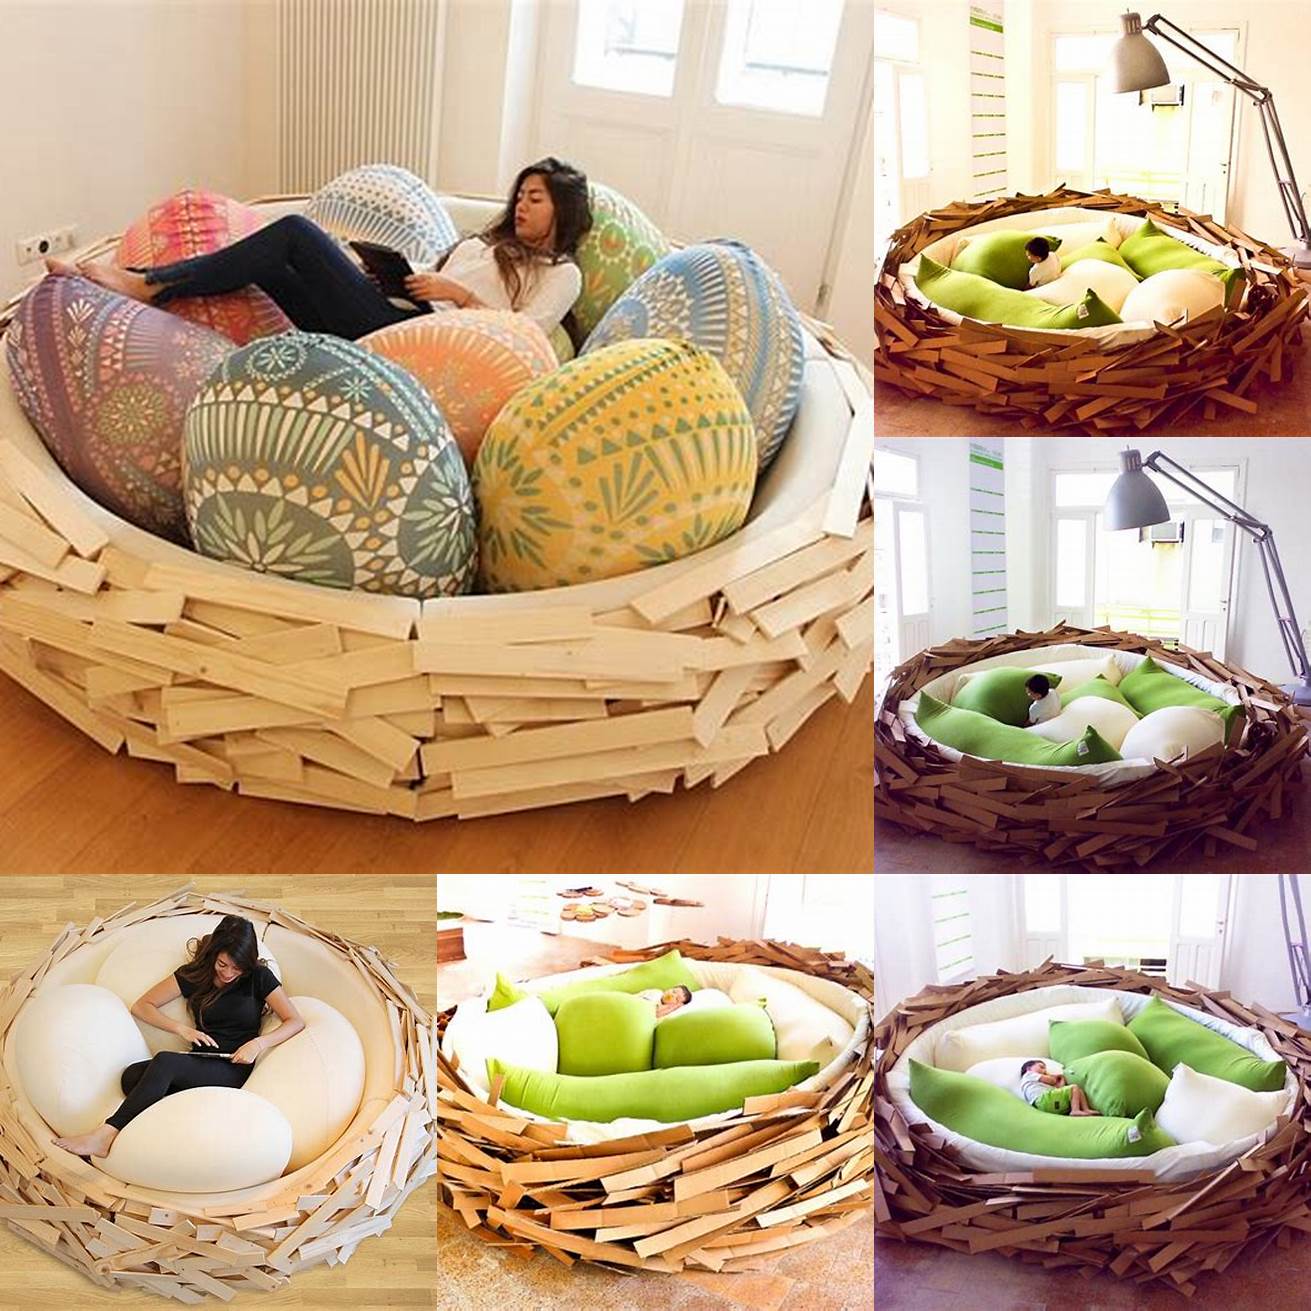 Giant Birds Nest Bed - This oversized bed is shaped like a birds nest and can accommodate multiple people Its perfect for snuggling up and watching movies with friends and family